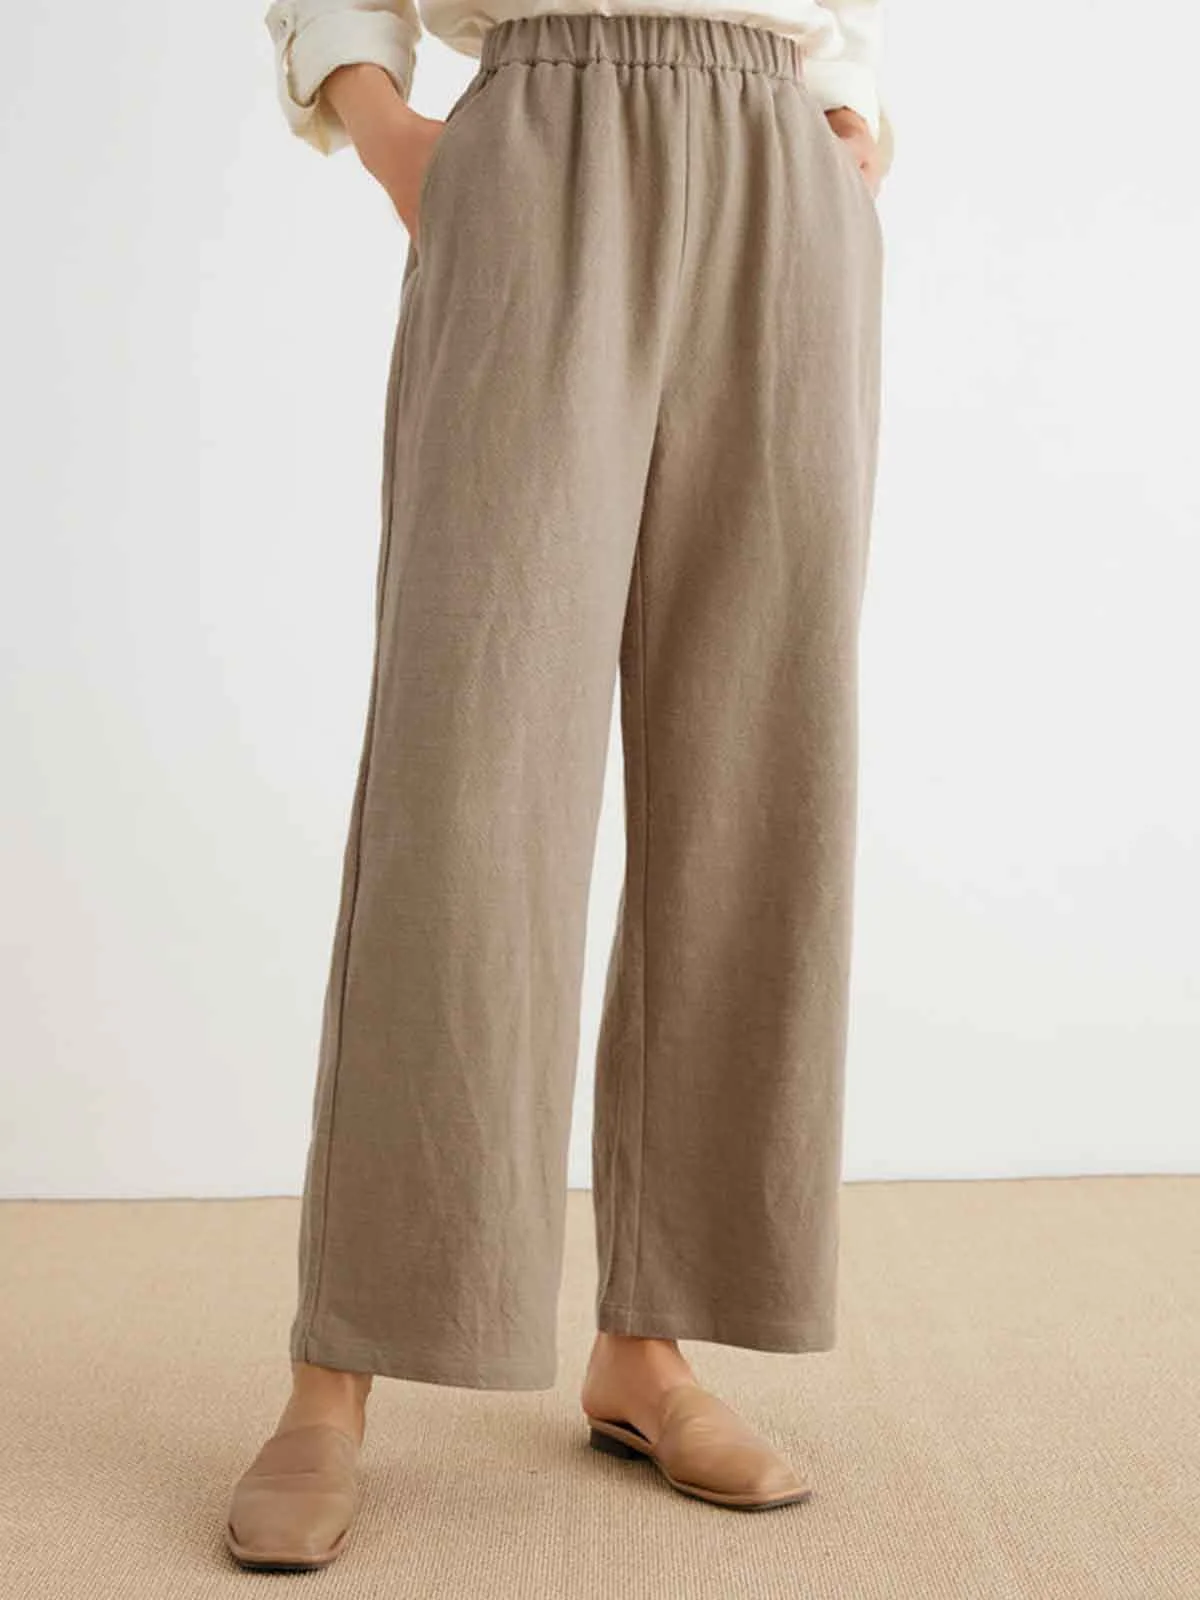 Polyester Cotton Plain Casual Casual Pants